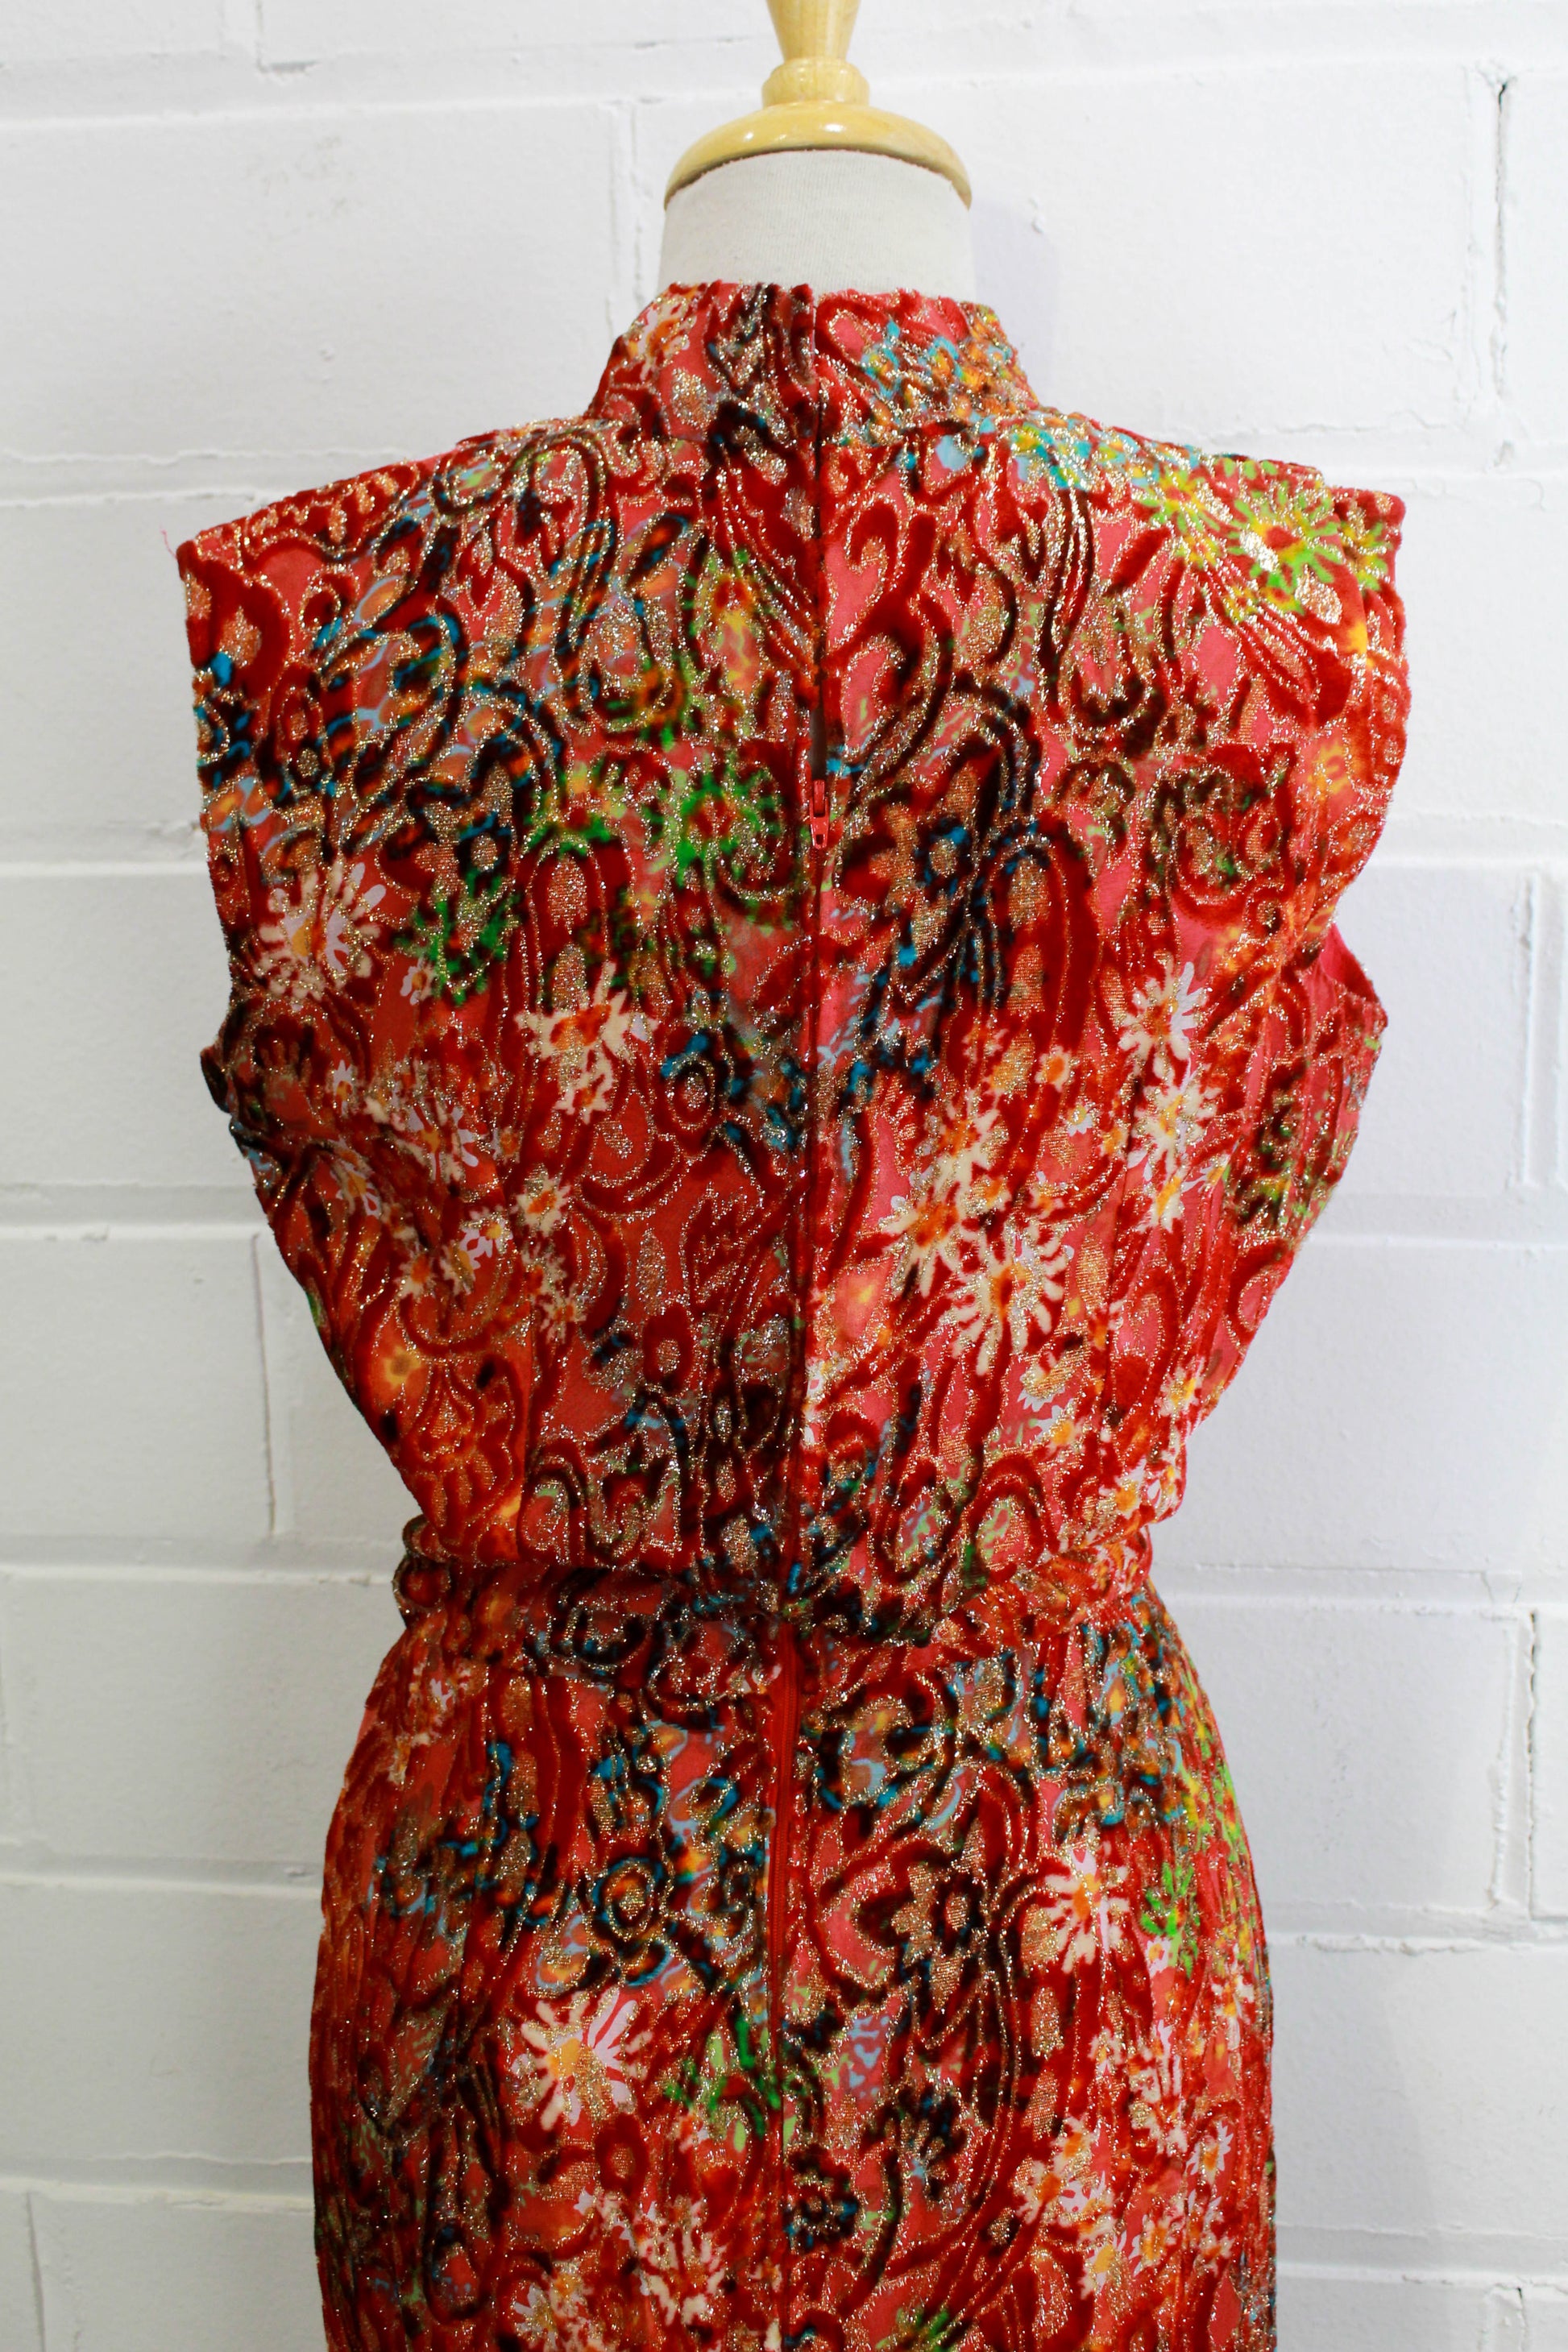 70s maxi dress red and gold velvet metallic floral print close up of back